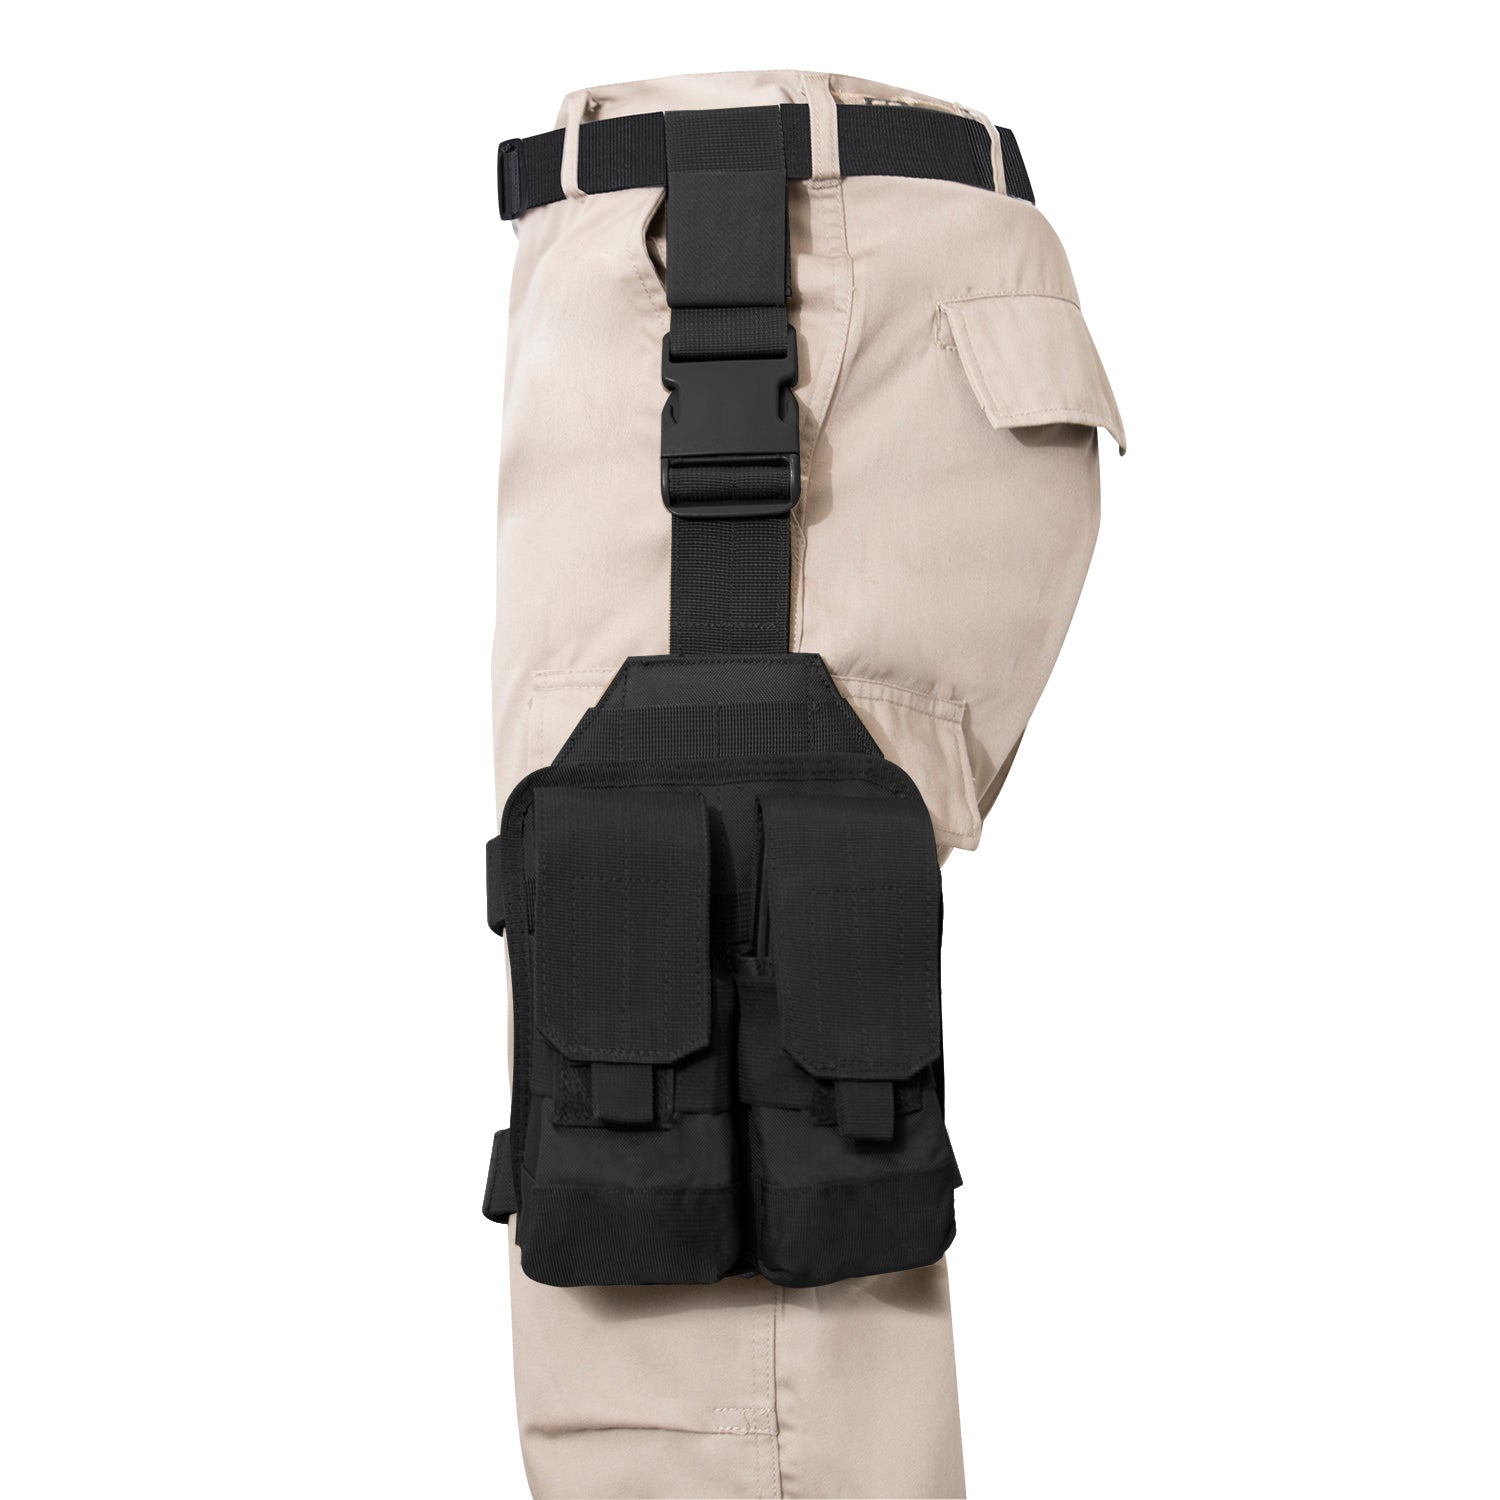 Rothco’s MOLLE Drop Leg Panel is designed to adapt to your tactical needs; the MOLLE panel can be utilized for mounting holsters, mag pouches, and other MOLLE accessories for easy access. 